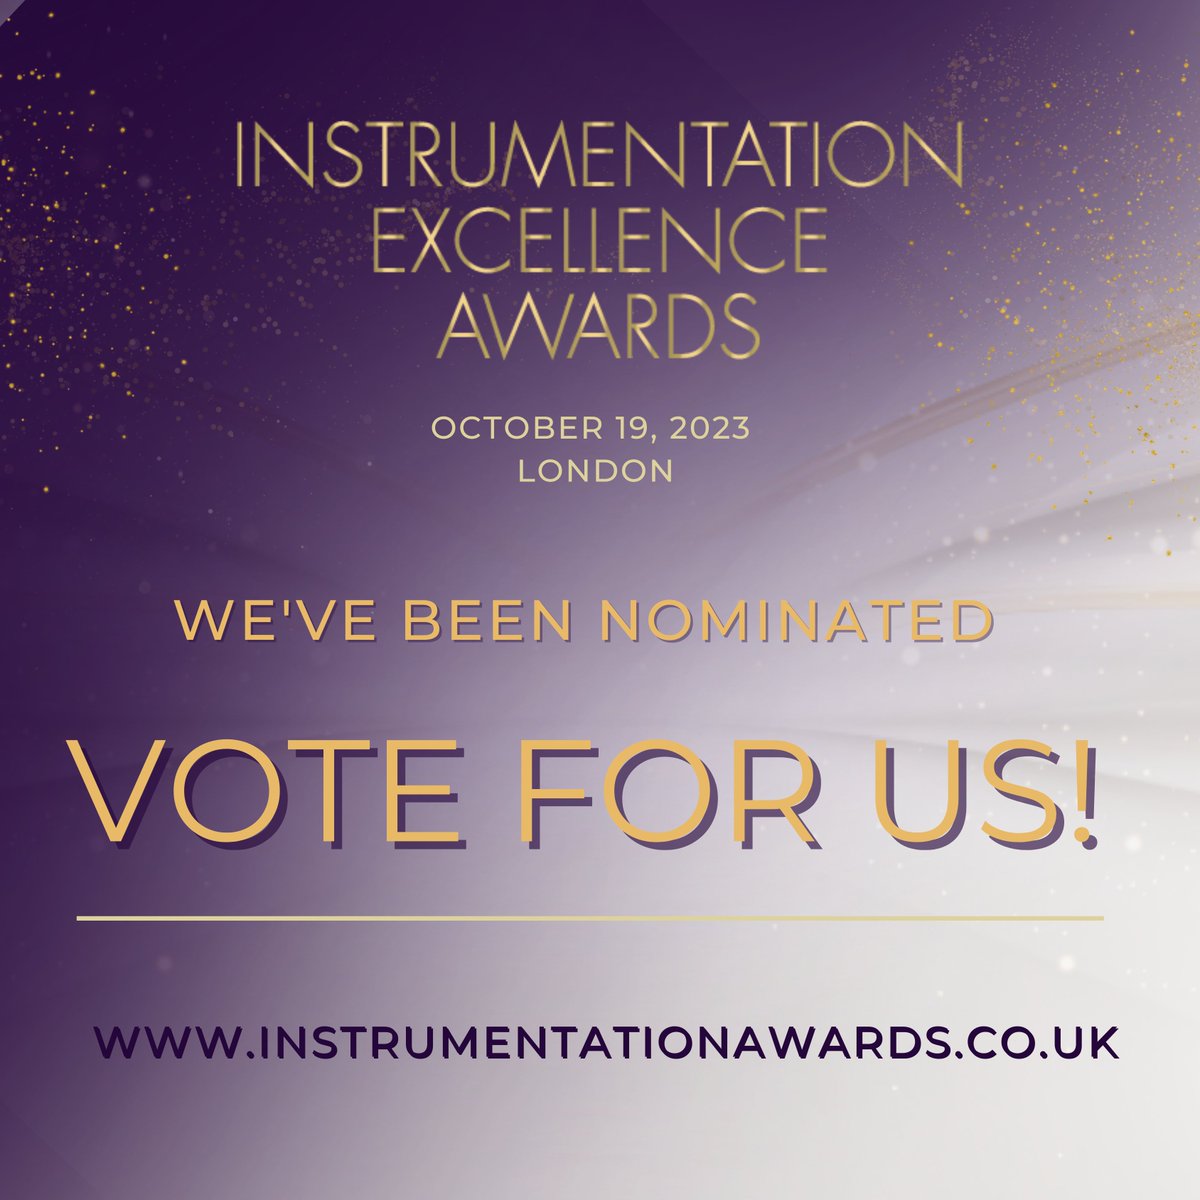 We've been nominated in the UK Instrumentation Excellence Awards 2023 in two categories – IIoT Product of the Year and Excellence in Innovation! Now, we’re reaching out to our amazing community for support. Cast your votes here by 11th August: instrumentationawards.co.uk/vote-2023/